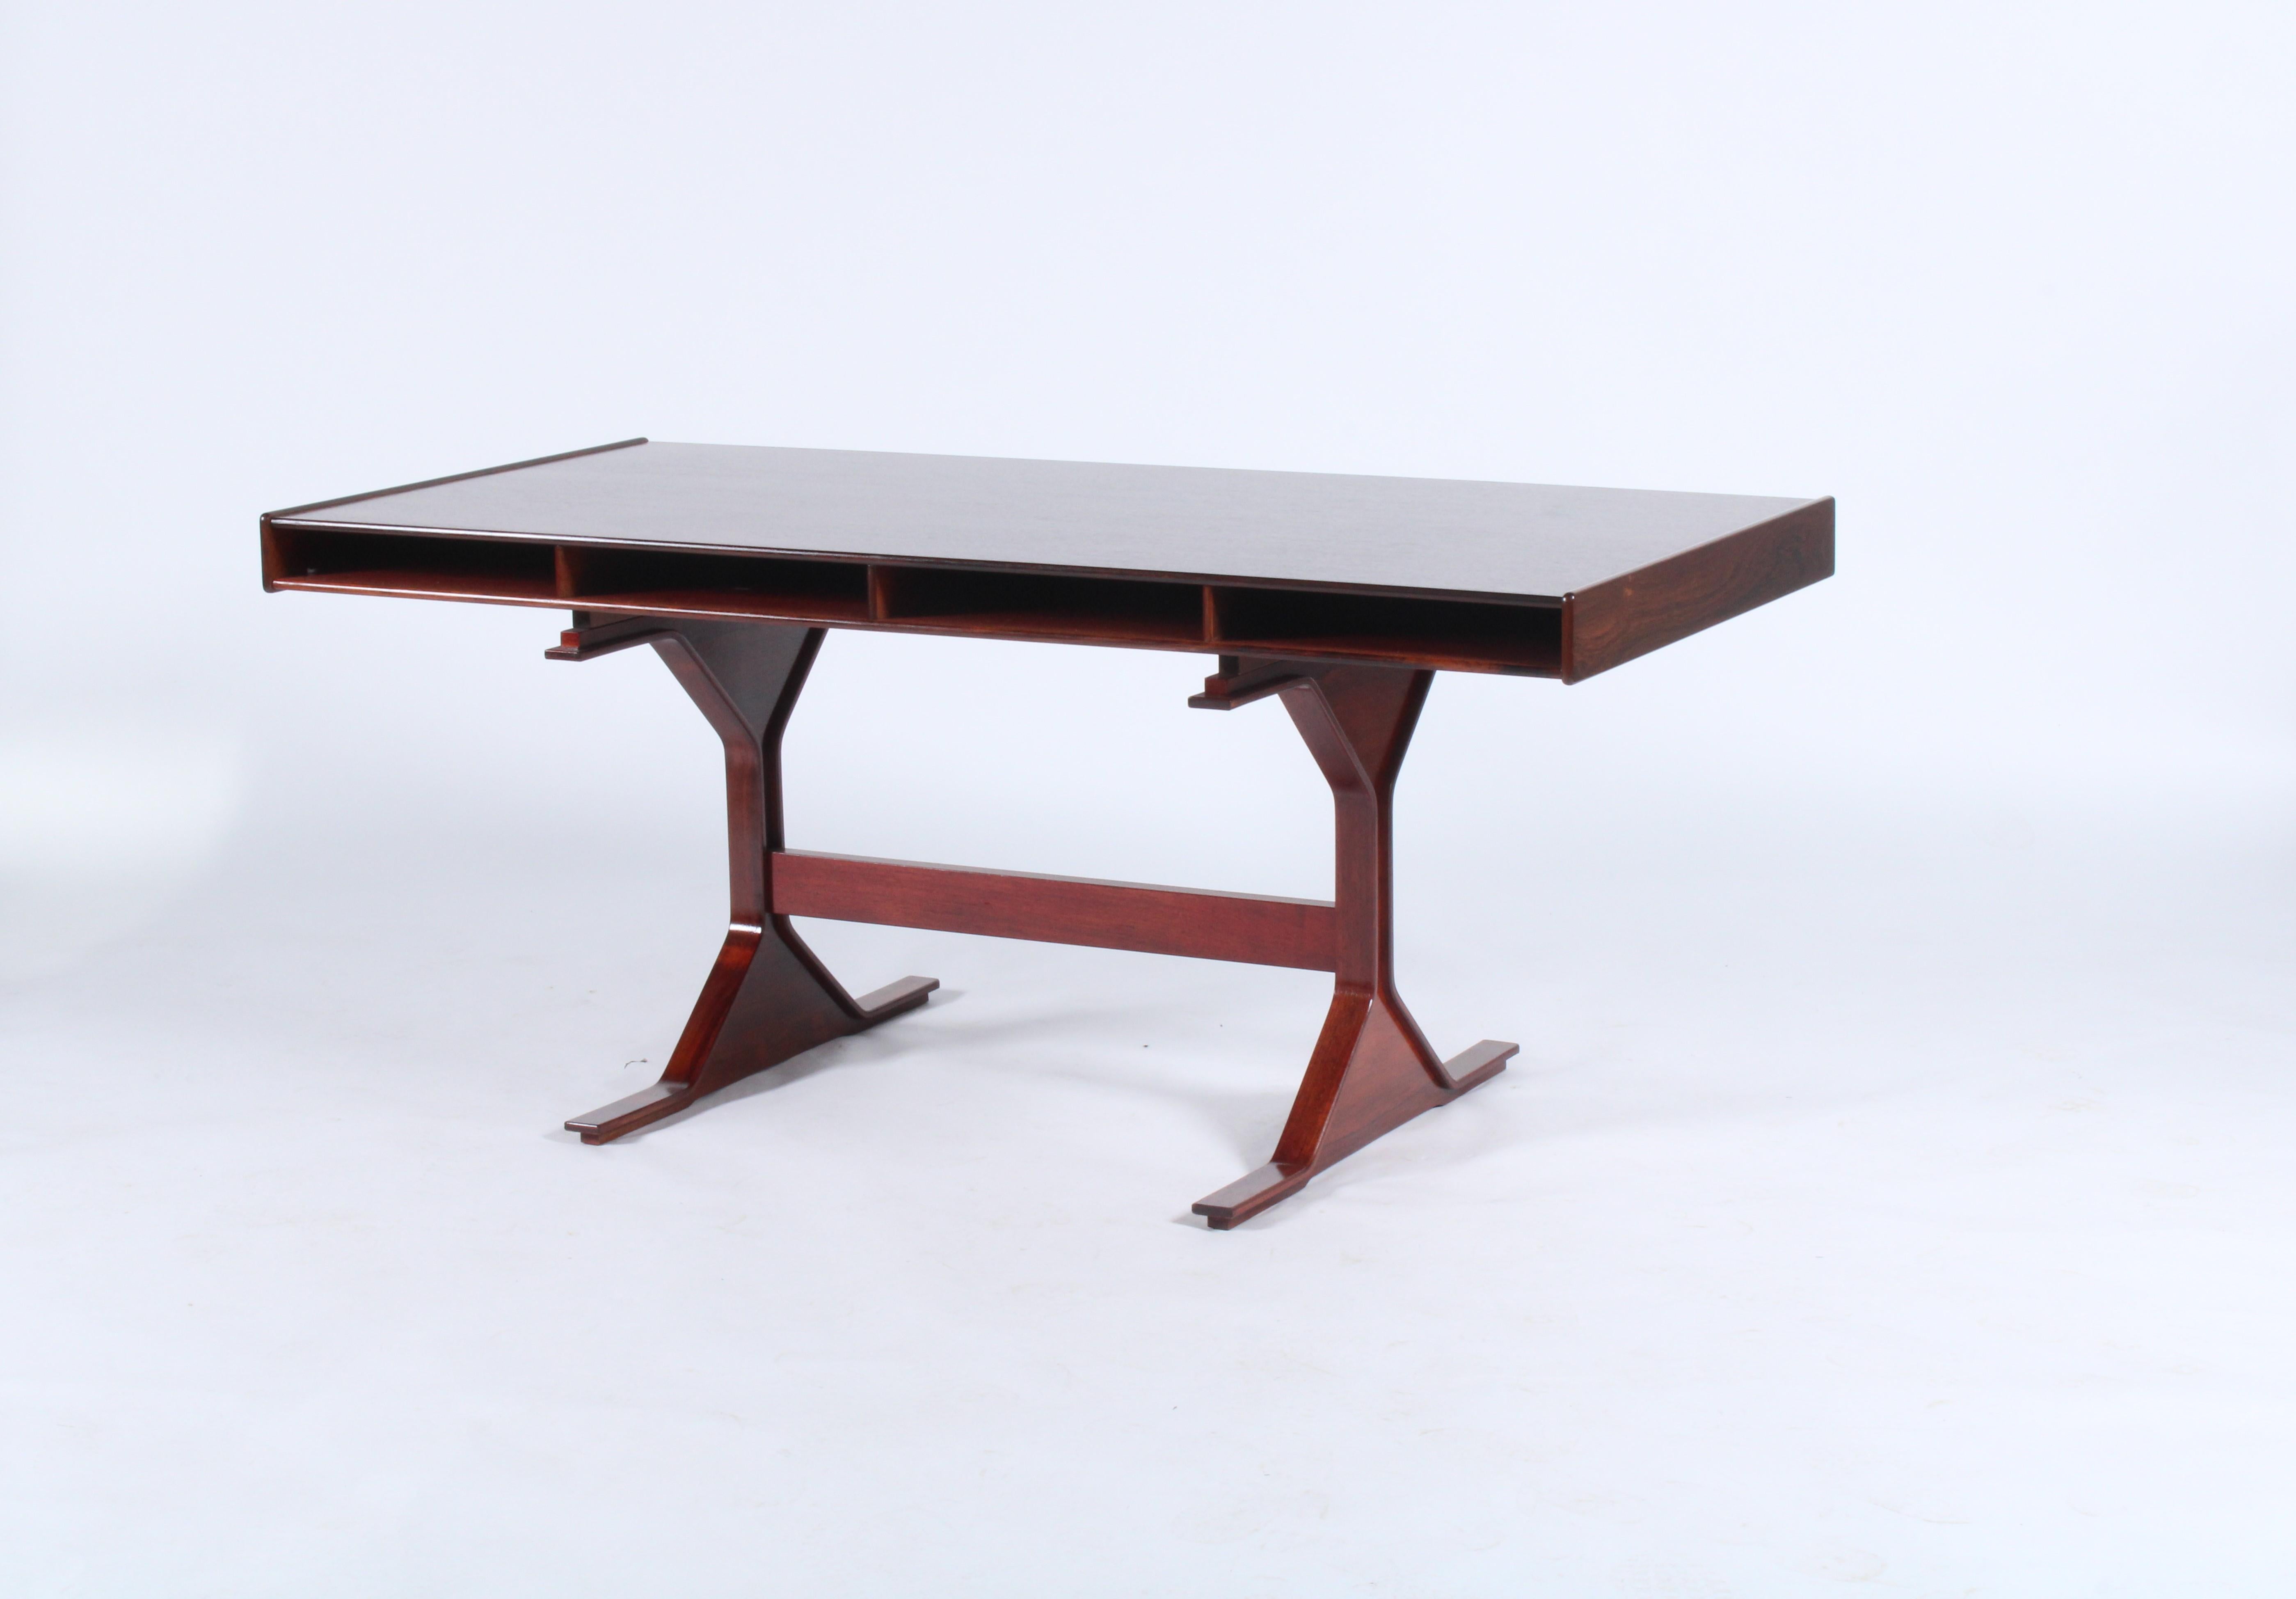 Exquisite vintage Italian desk in pallisandro wood circa 1960 by renowned designer Gianfranco Frattini. A large work surface area and ample drawer storage make this a most stylish, desirable and user friendly piece.Bearing the manufacturers original